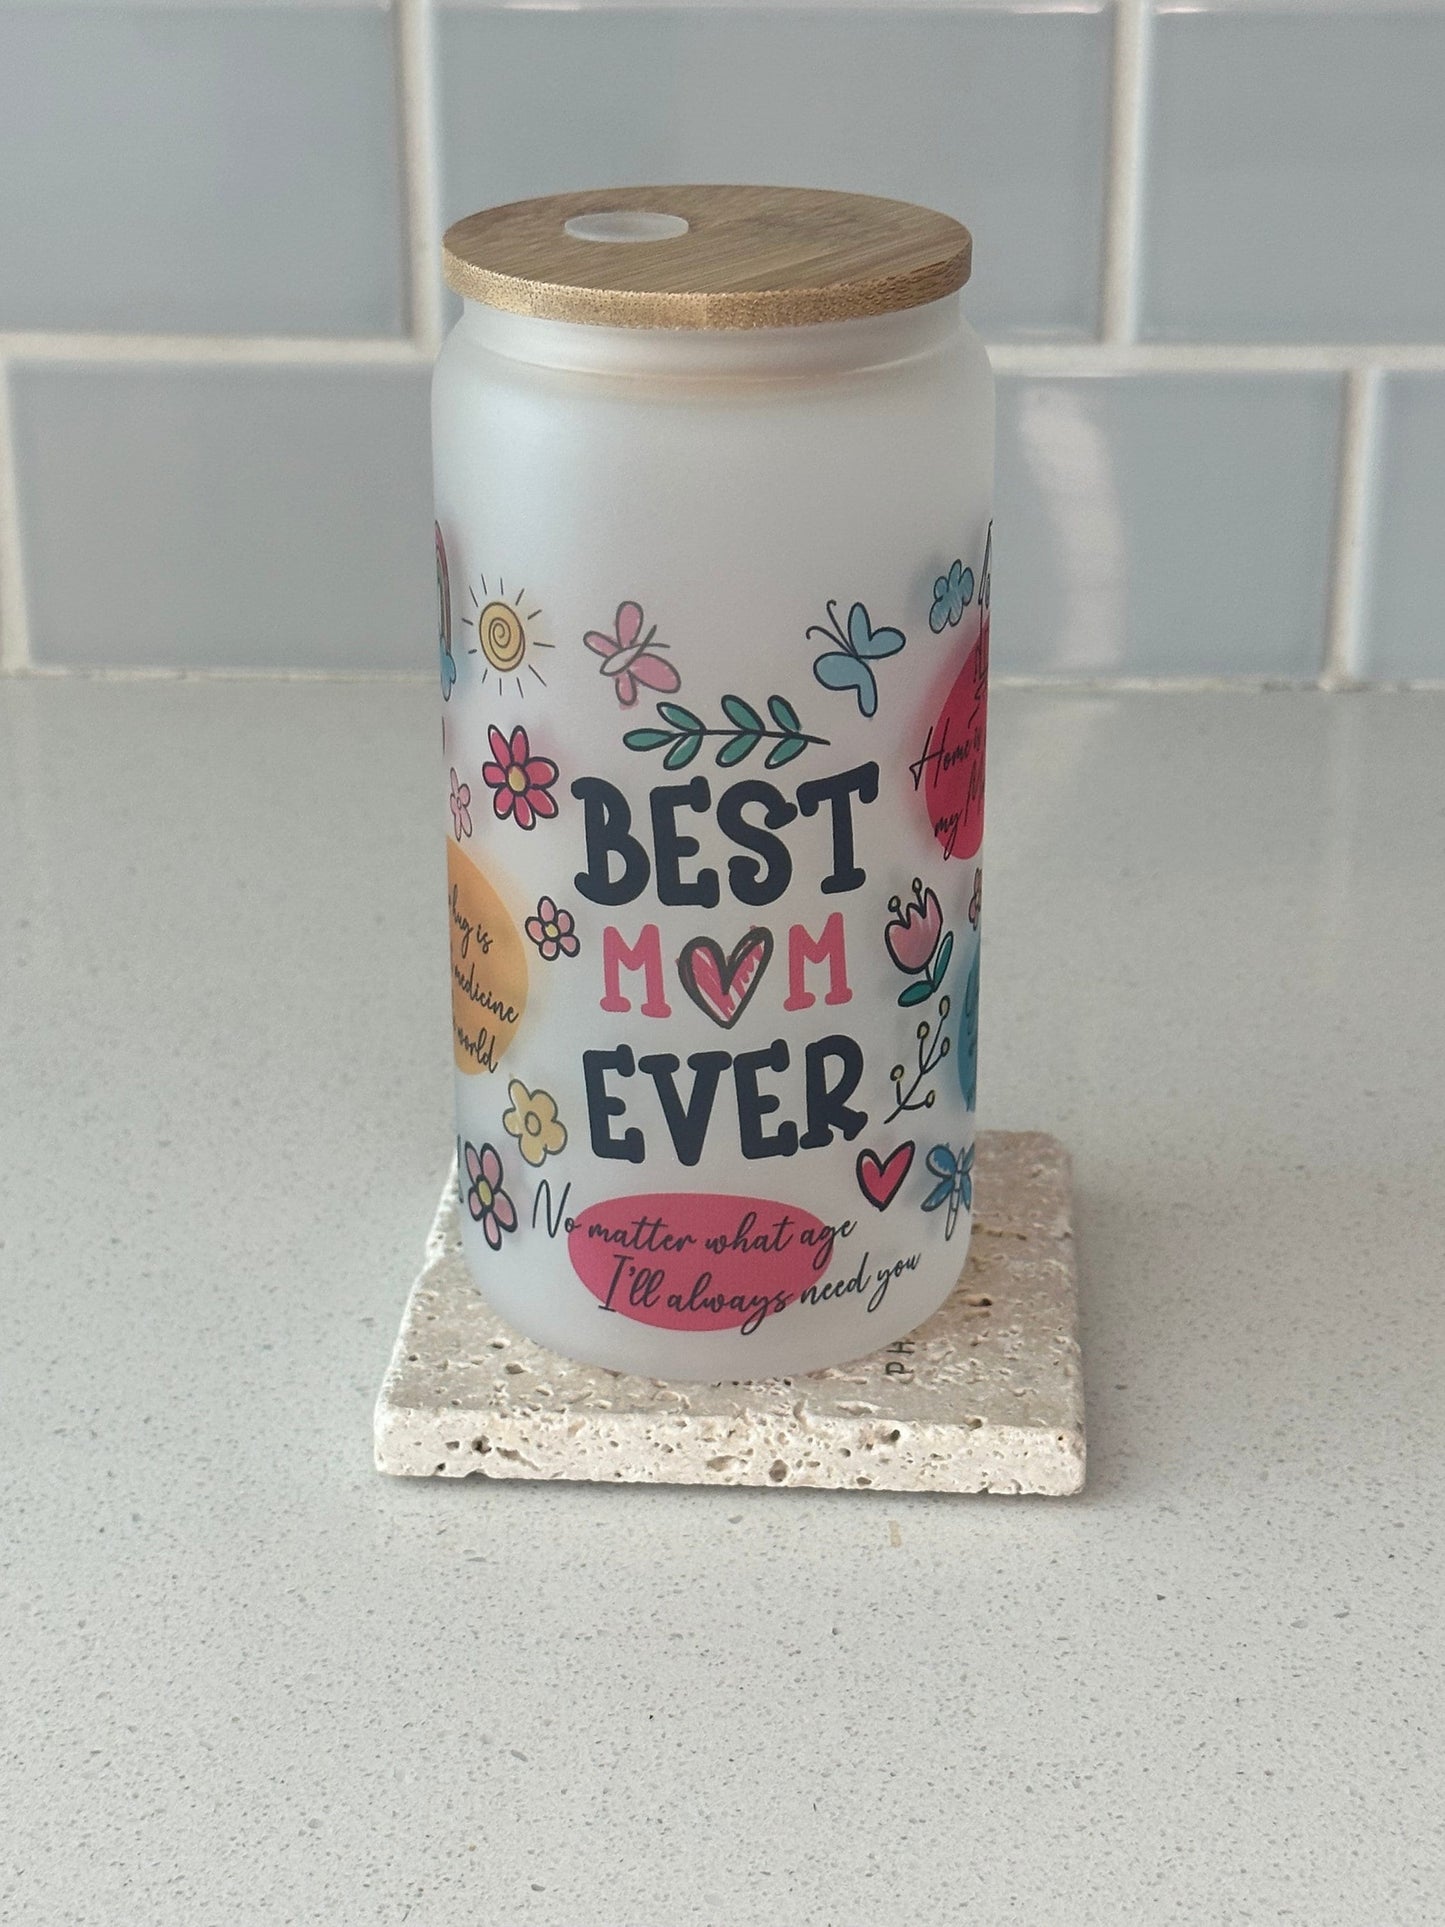 Mom - Best Mom Ever Cup / Cup with Bamboo Lid / Ice Coffee Cup / Cute Gift / Cute Drink Cup / Mother’s Day / Gift for her /Gift For Mom